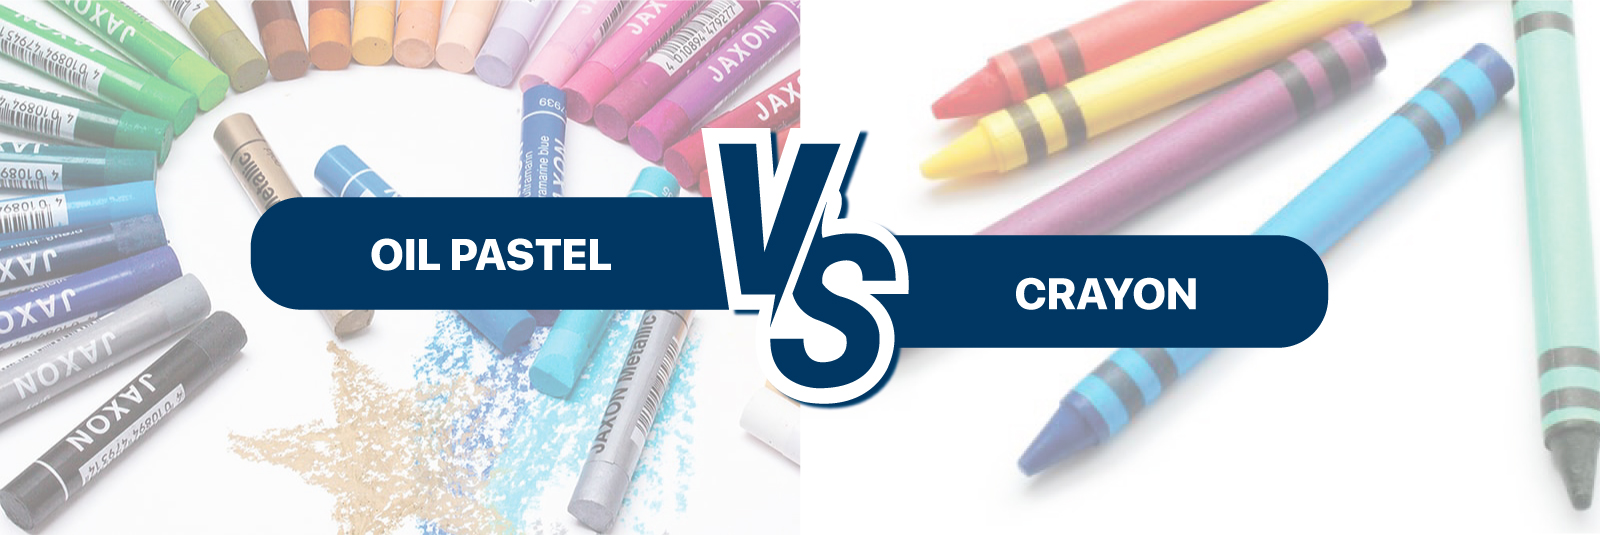 What is the difference between Oil Pastel and Crayon